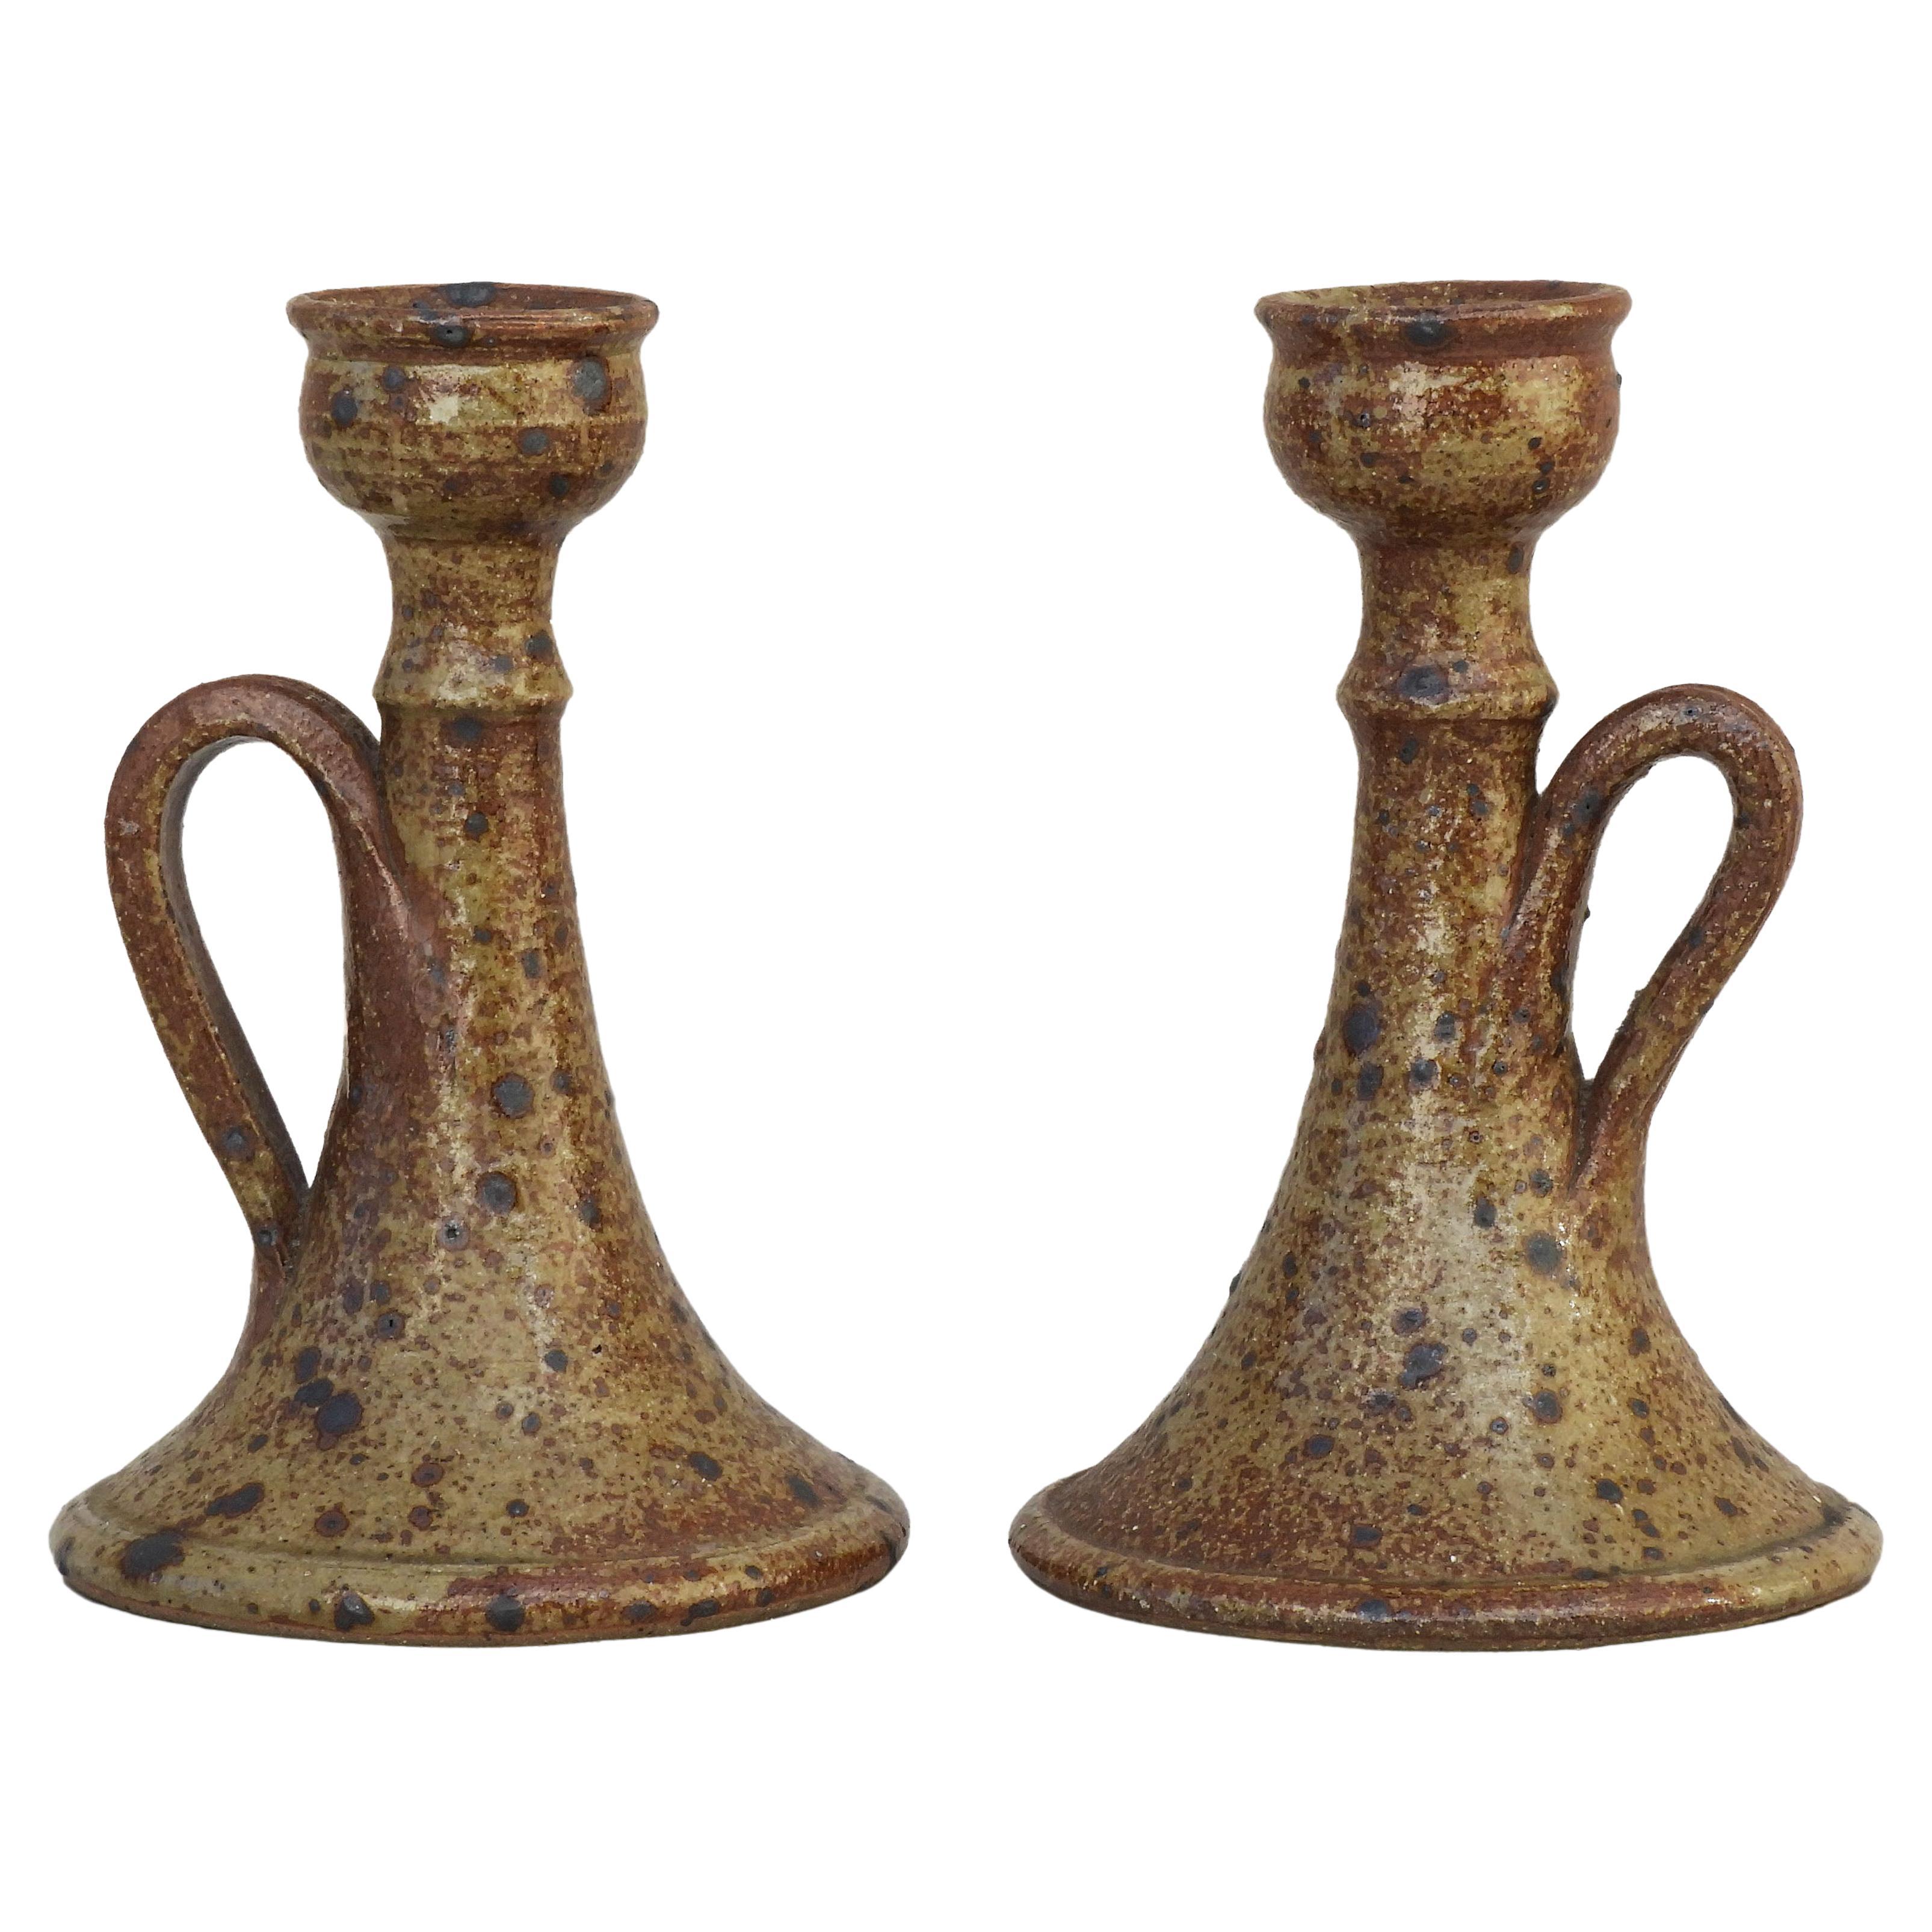 Organic Ironstone Candle Holders 1960s French Studio Pottery 